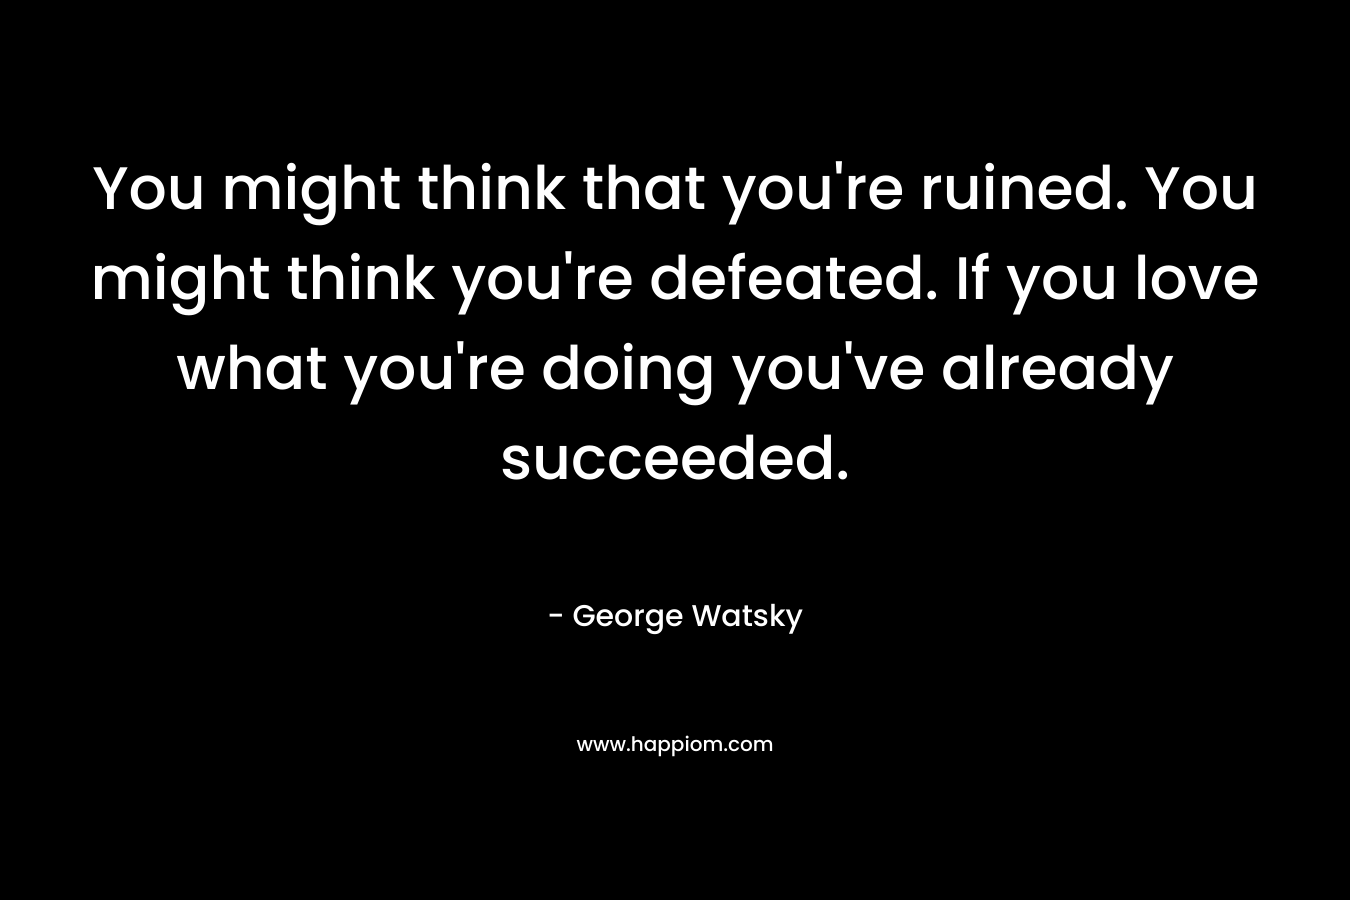 You might think that you’re ruined. You might think you’re defeated. If you love what you’re doing you’ve already succeeded. – George Watsky